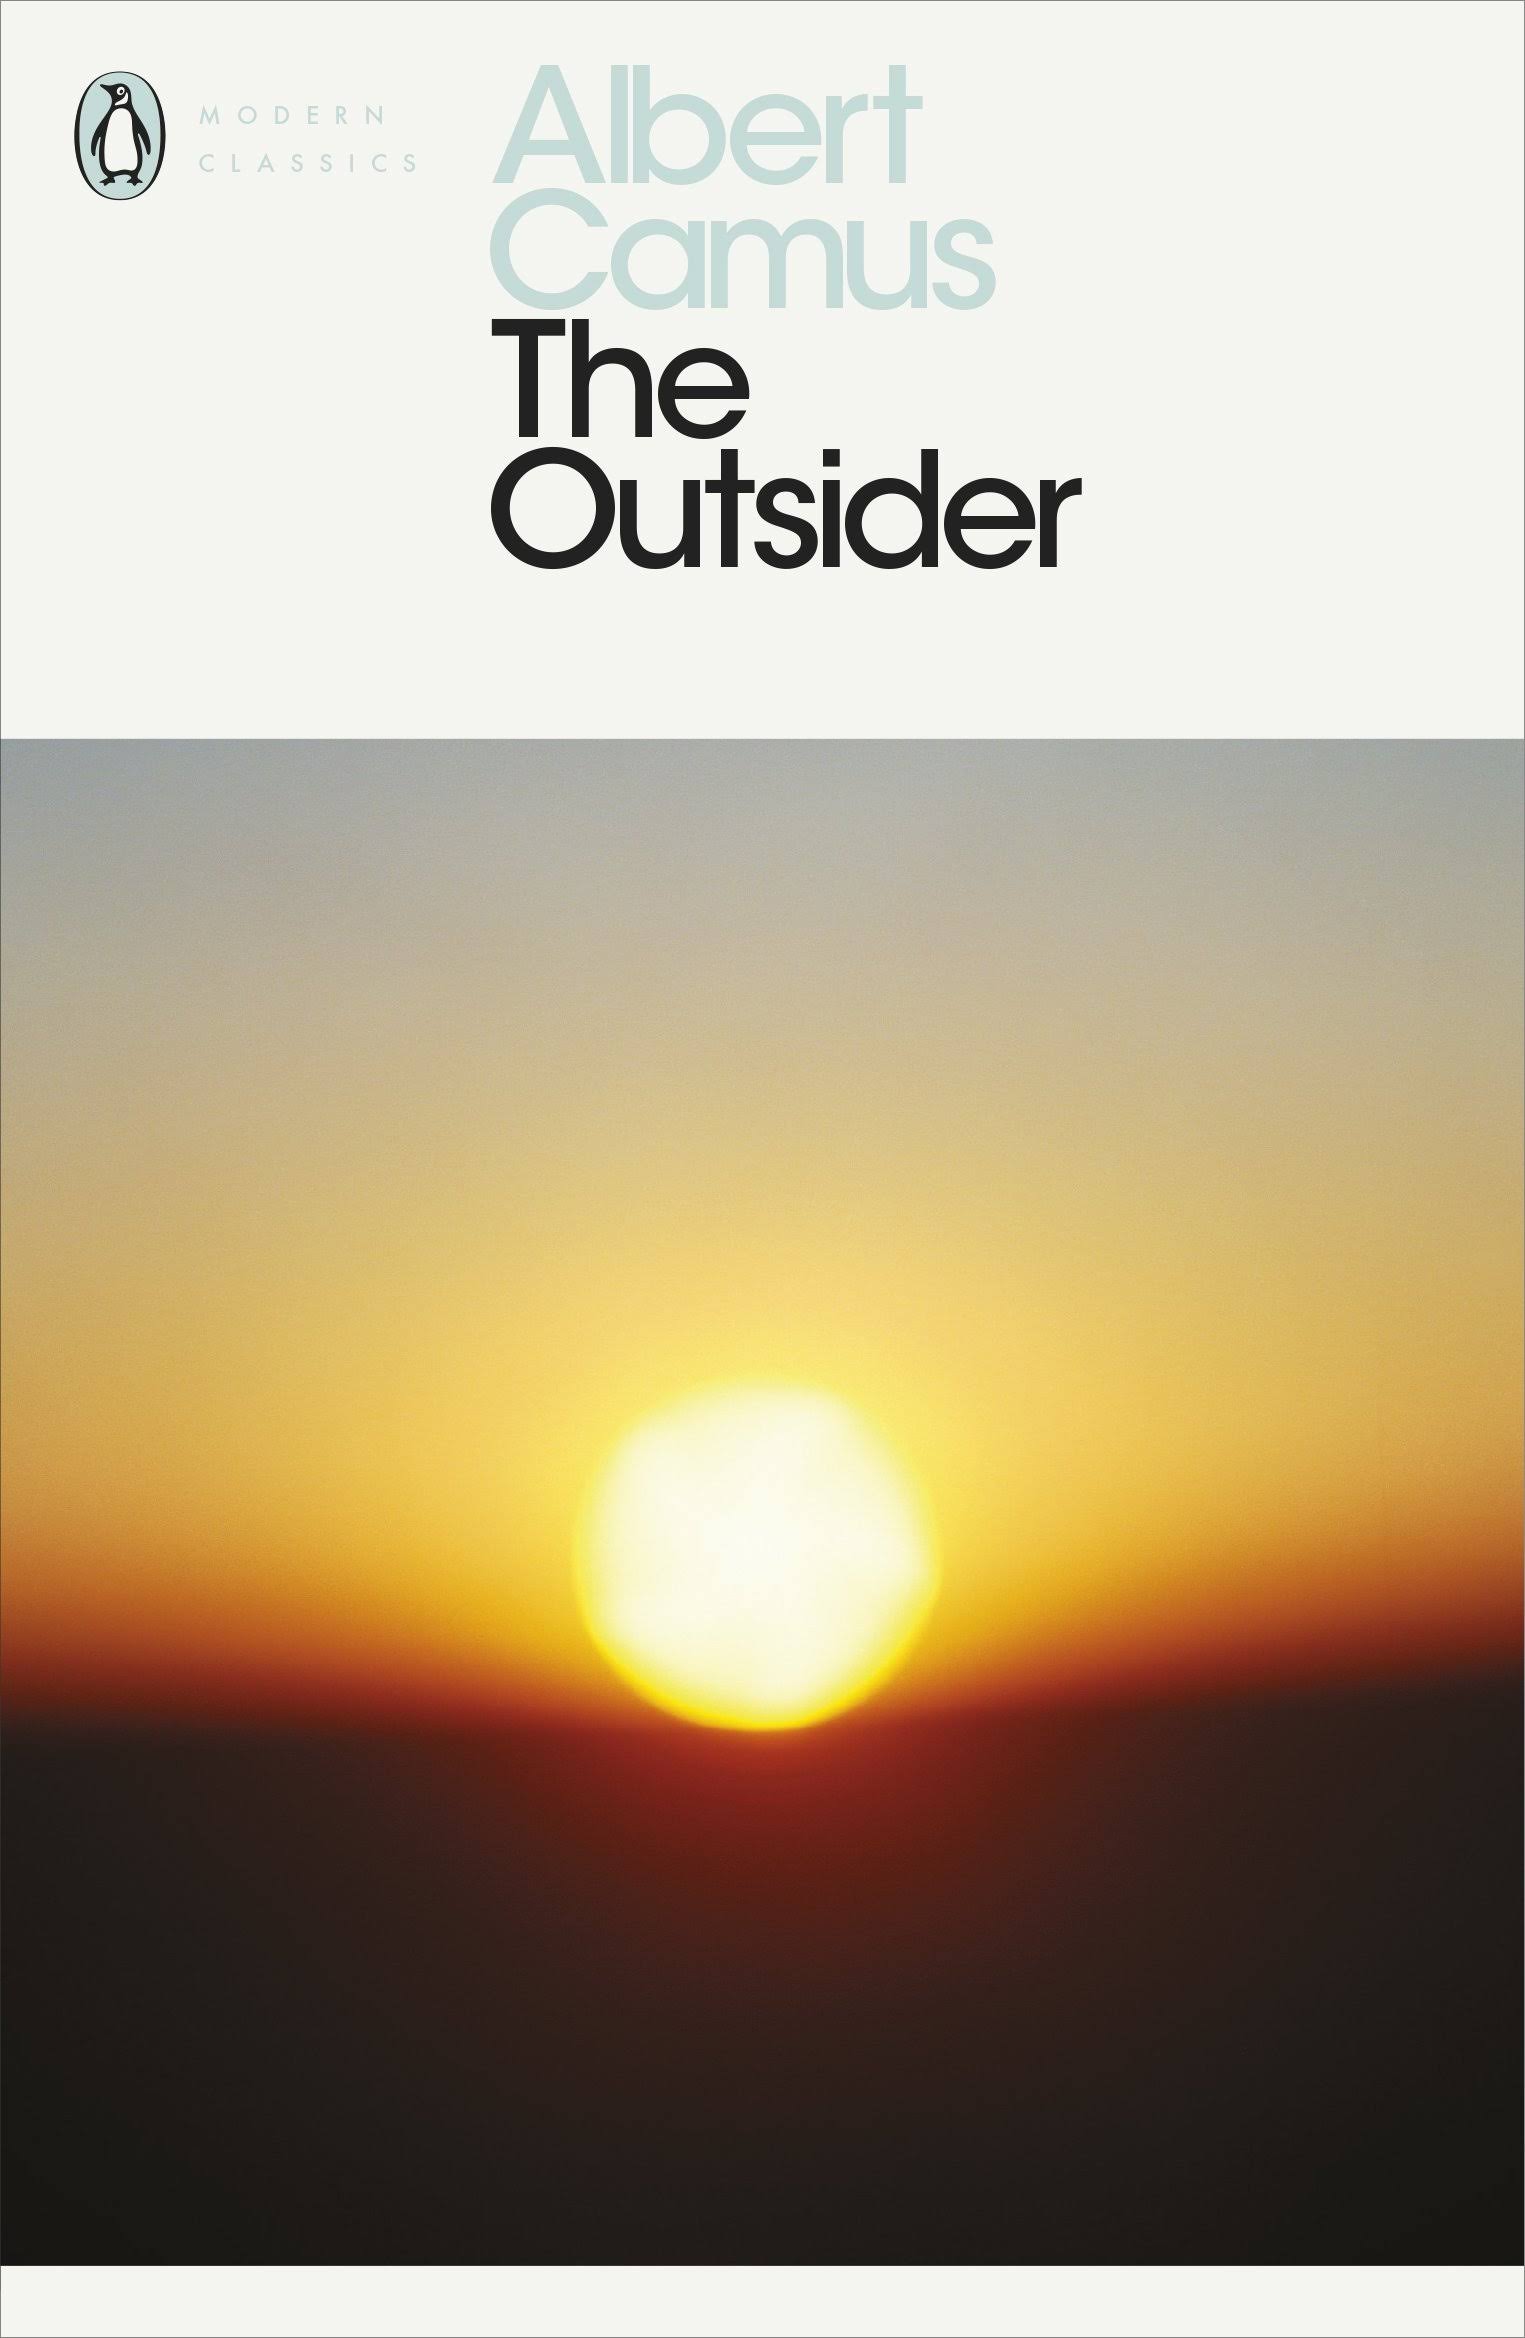 Modern Classics the Outsider [Book]